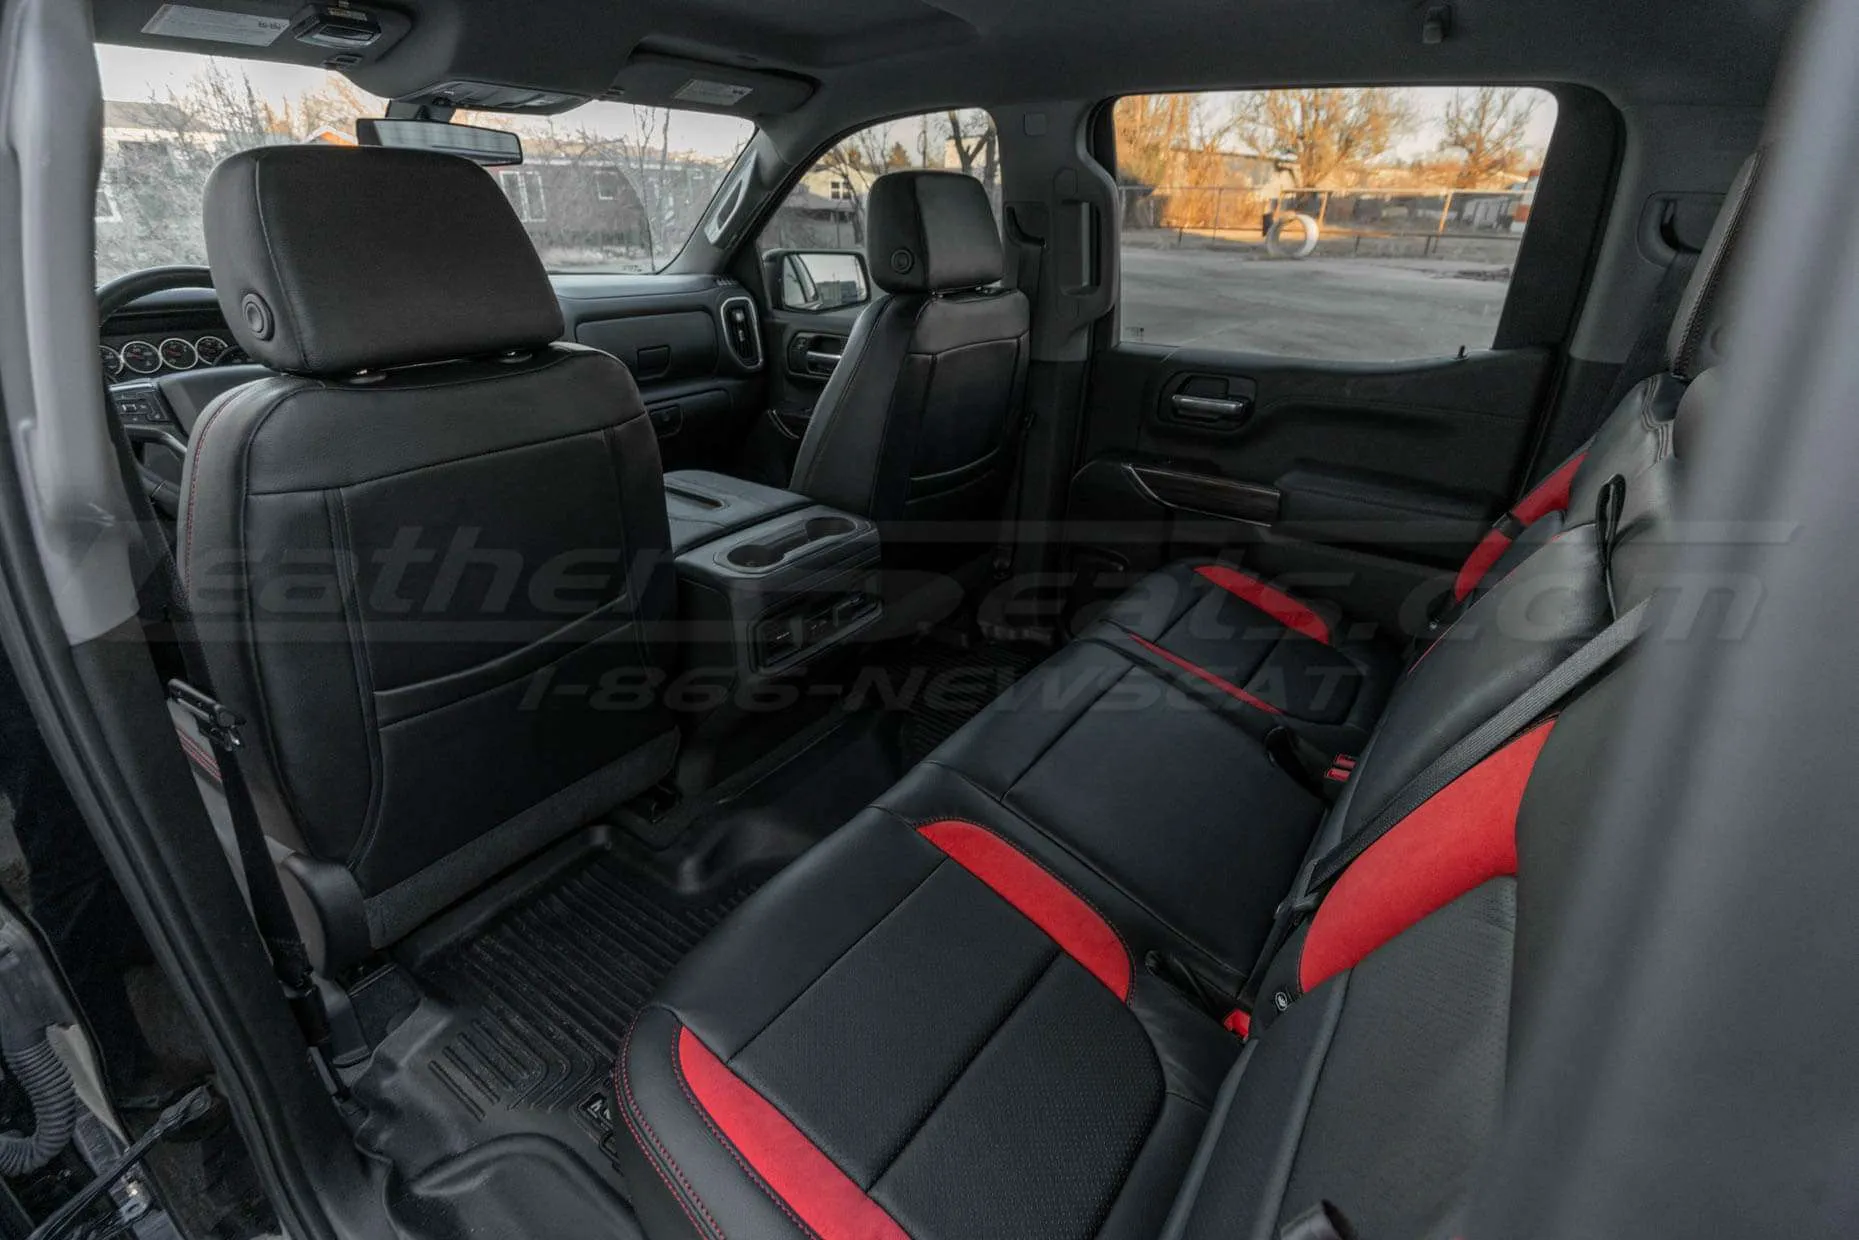 Back view of front seat seats - driver's side